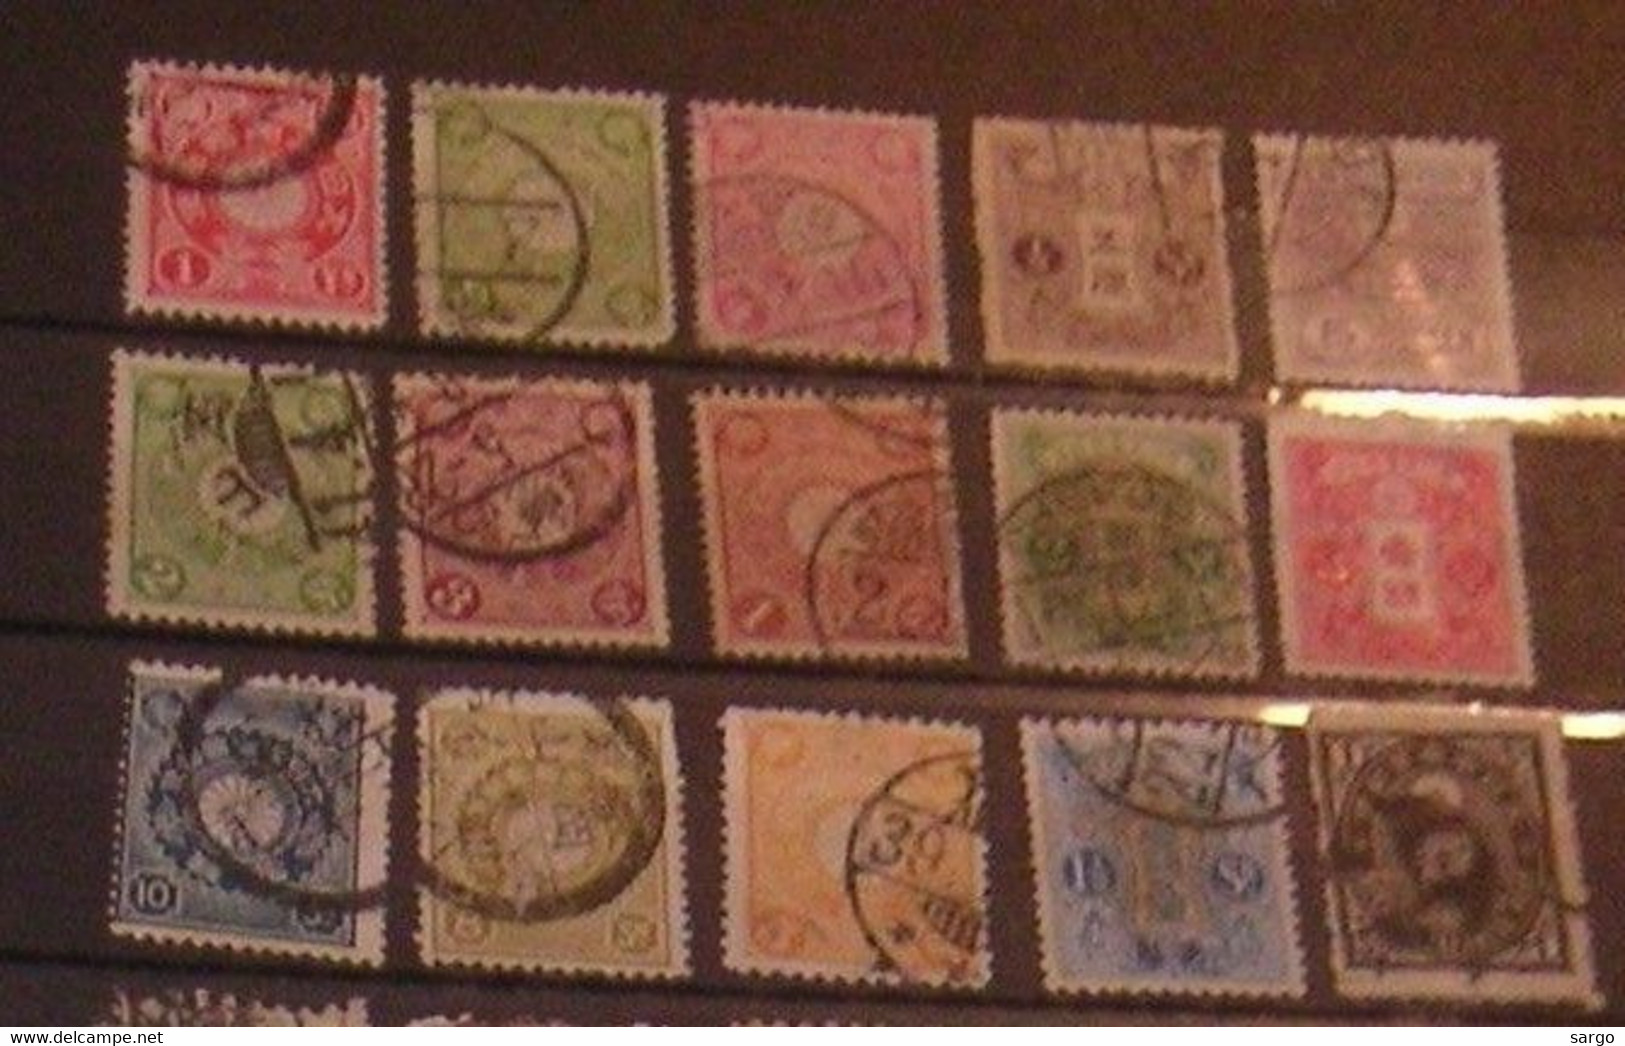 JAPAN  - LOT OF 43 STAMP PERIOD 1872 - 1934 - USED - KOBANS - CRYSANTHEMUM - - Collections, Lots & Séries